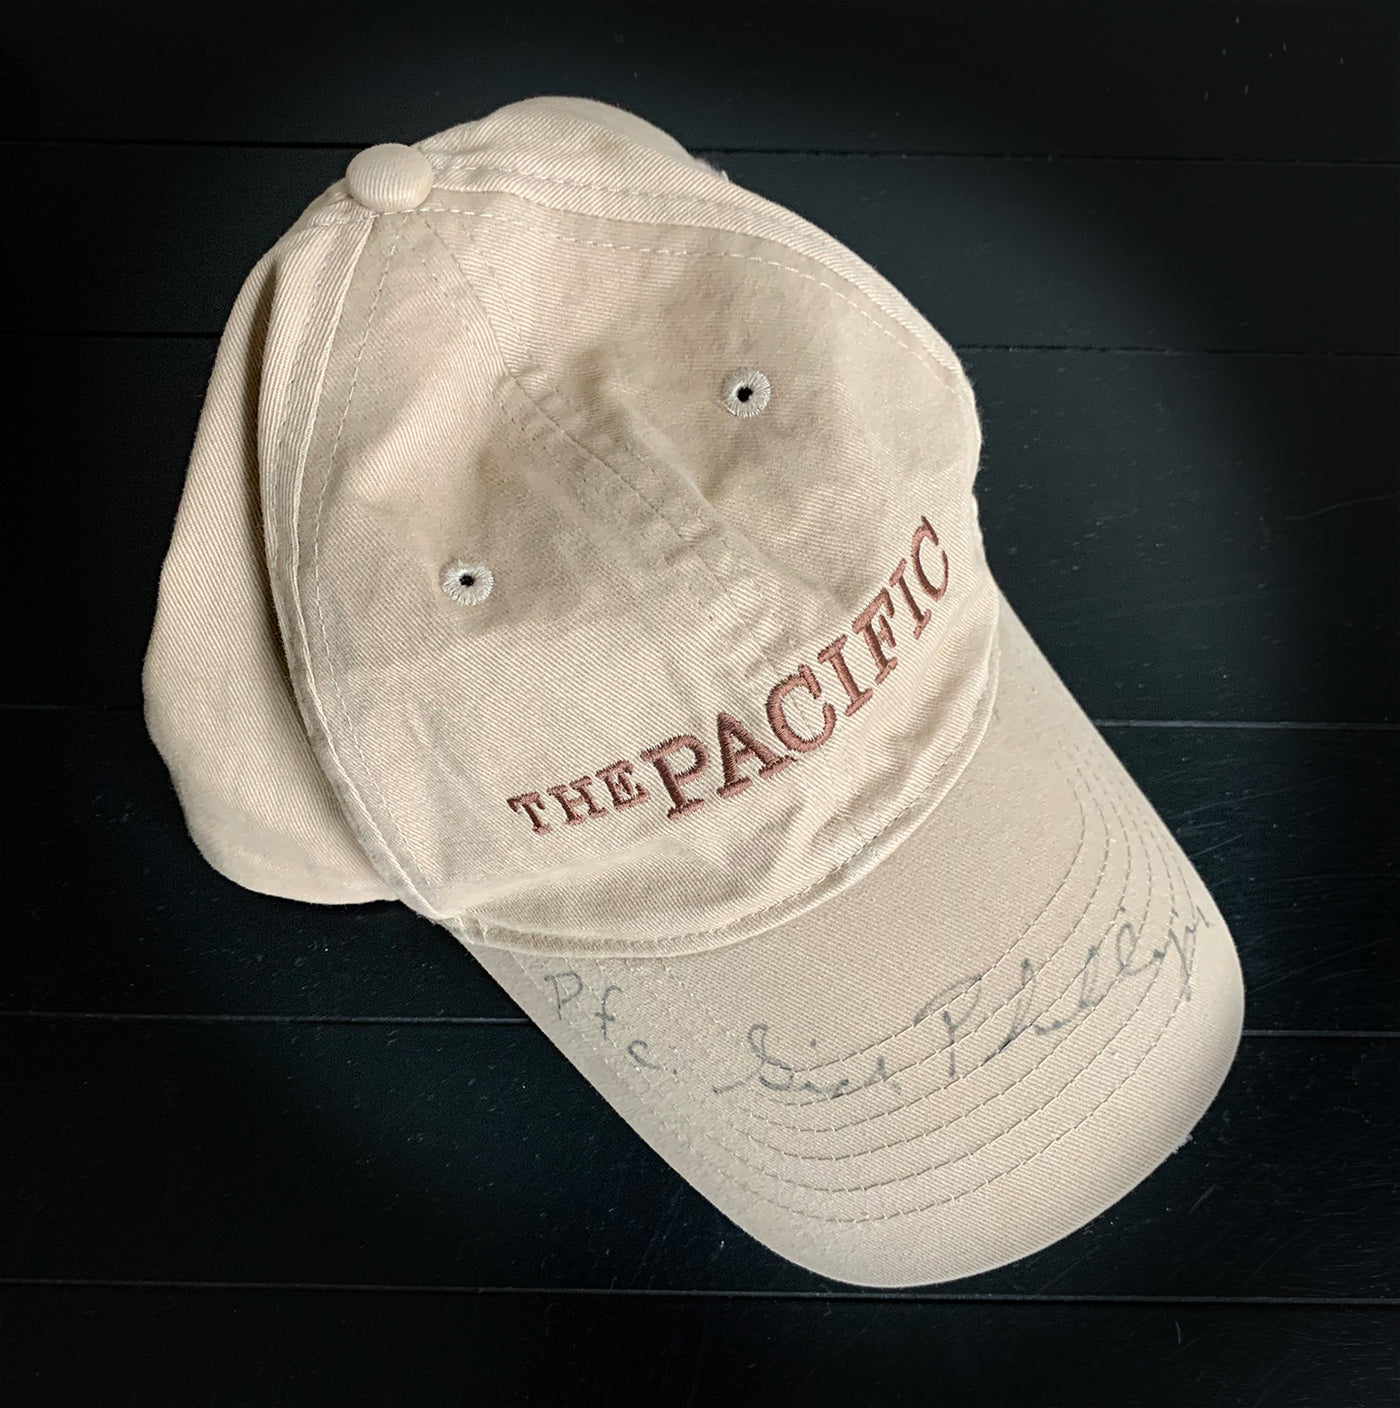 "The Pacific" Hat Signed Over Brim